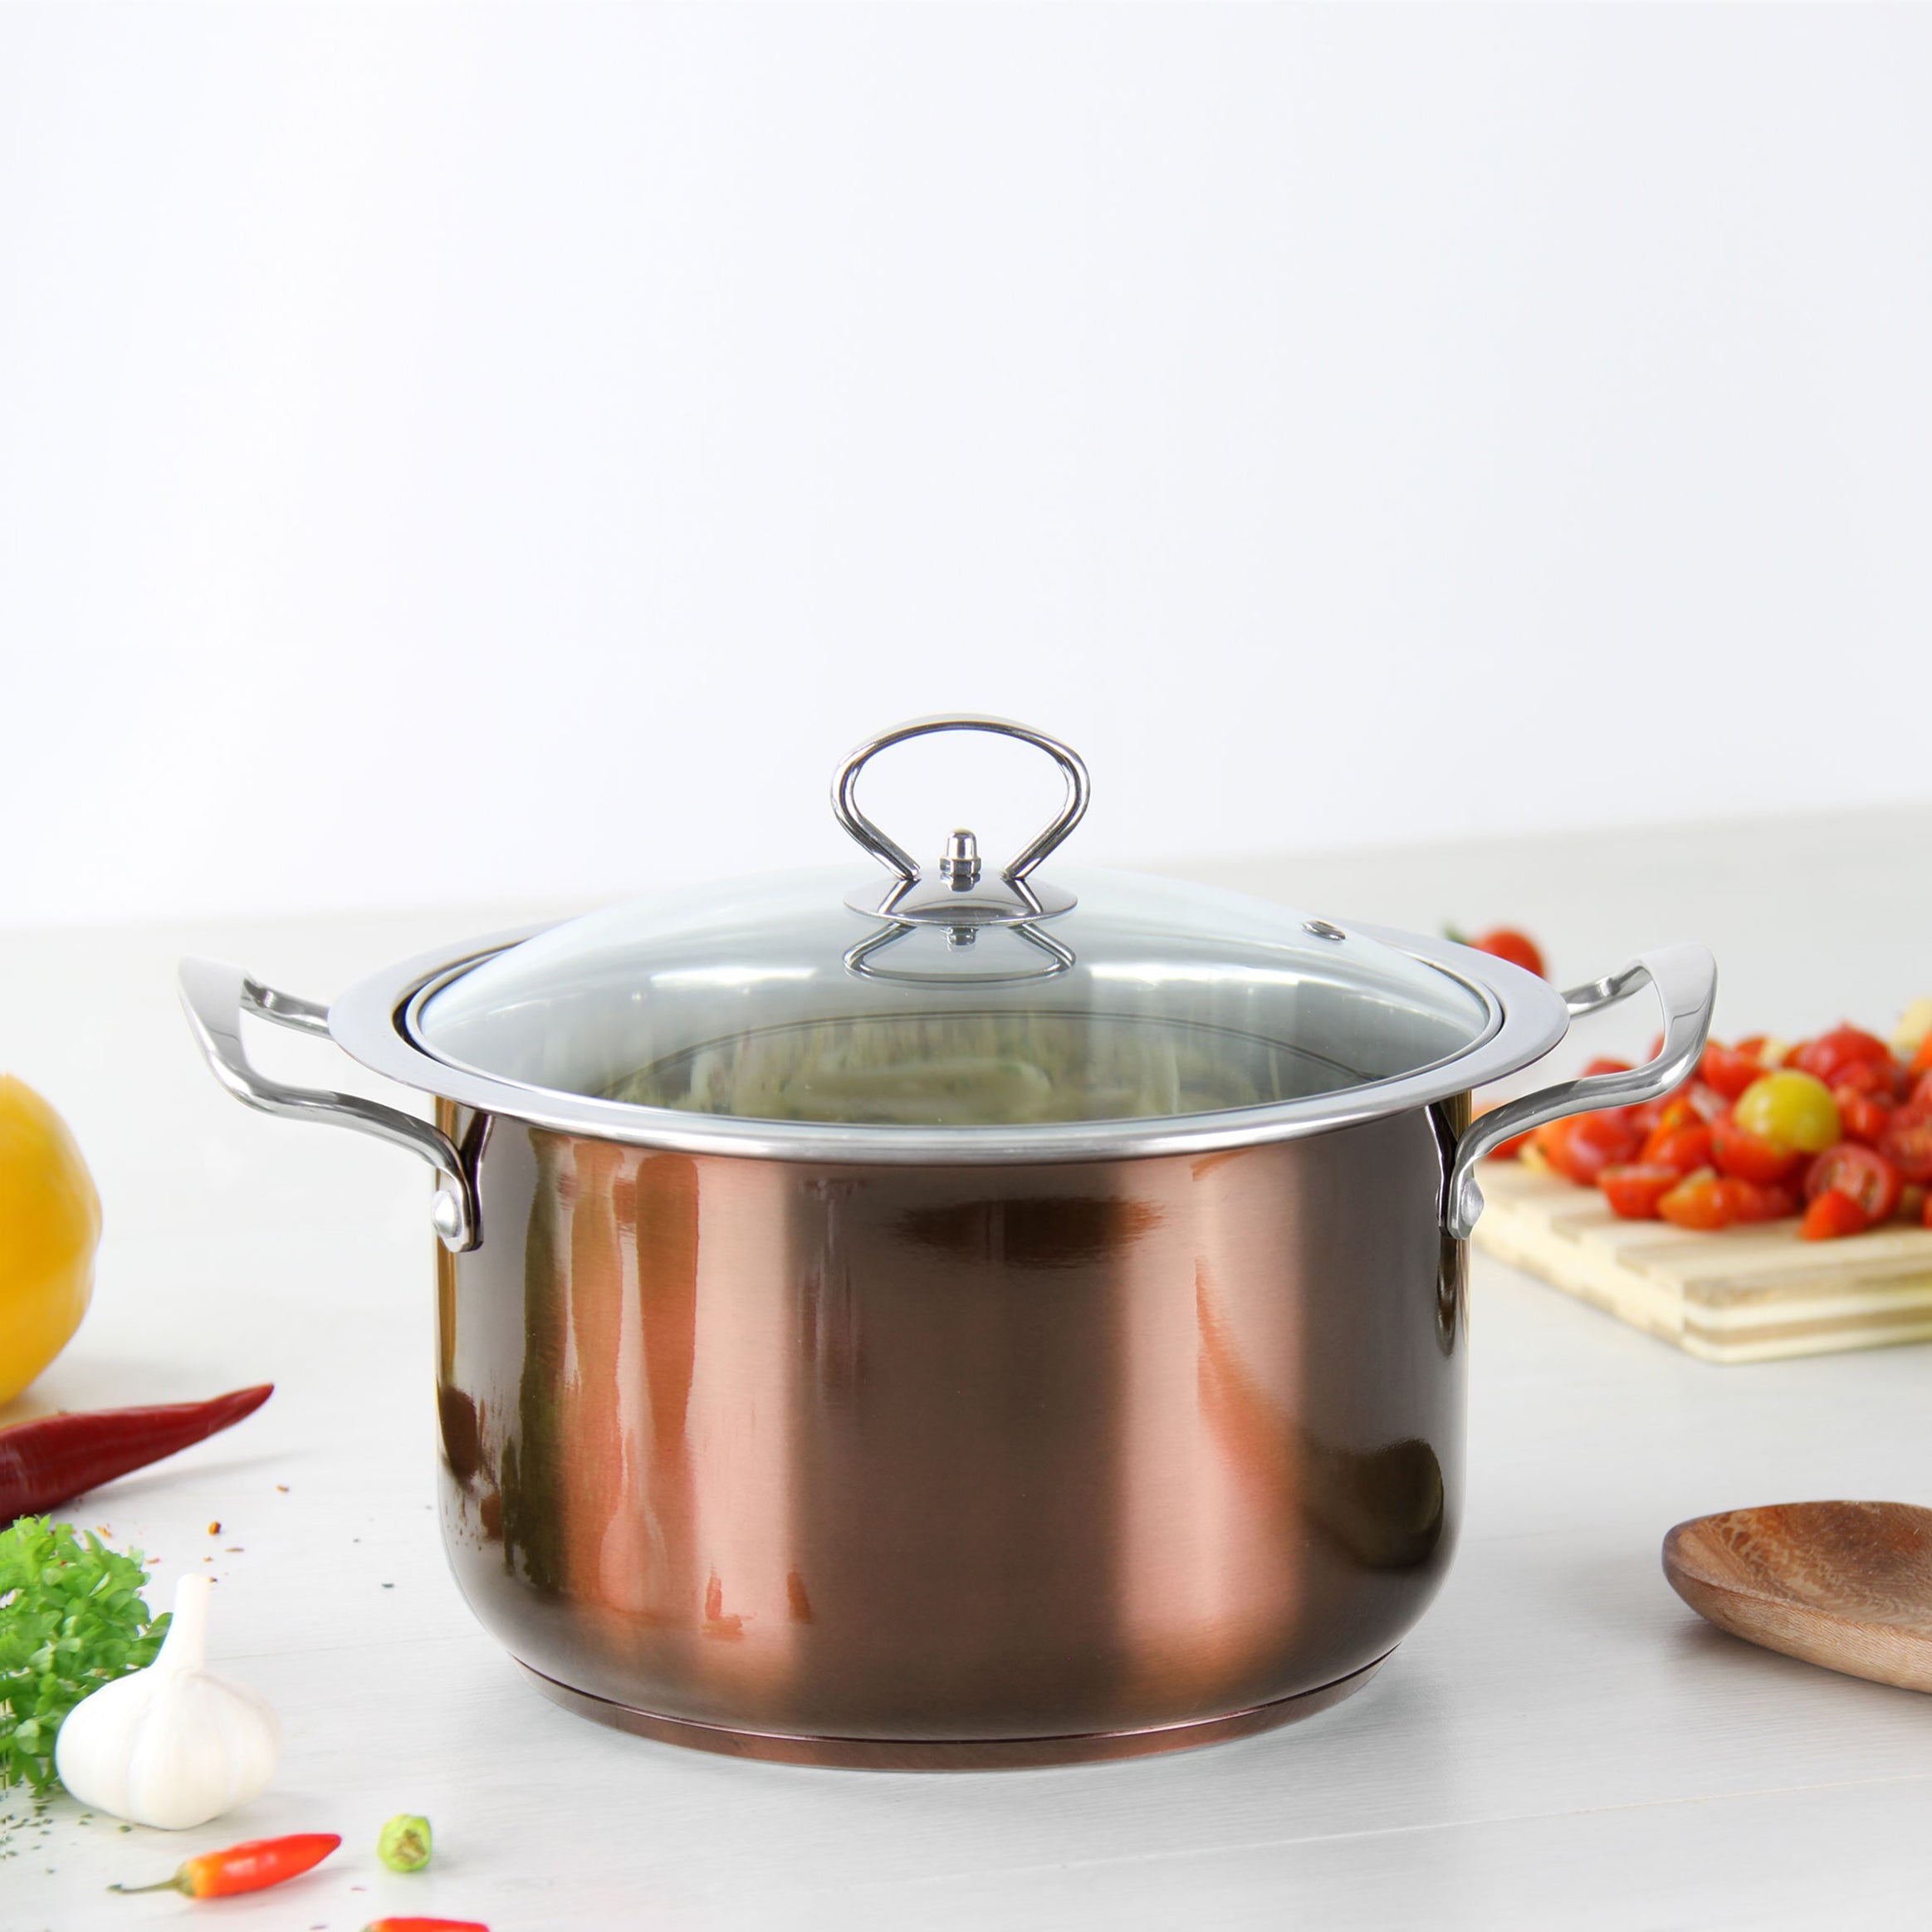 Stainless Steel Stockpot - Induction Base - AXINITE - 28cm